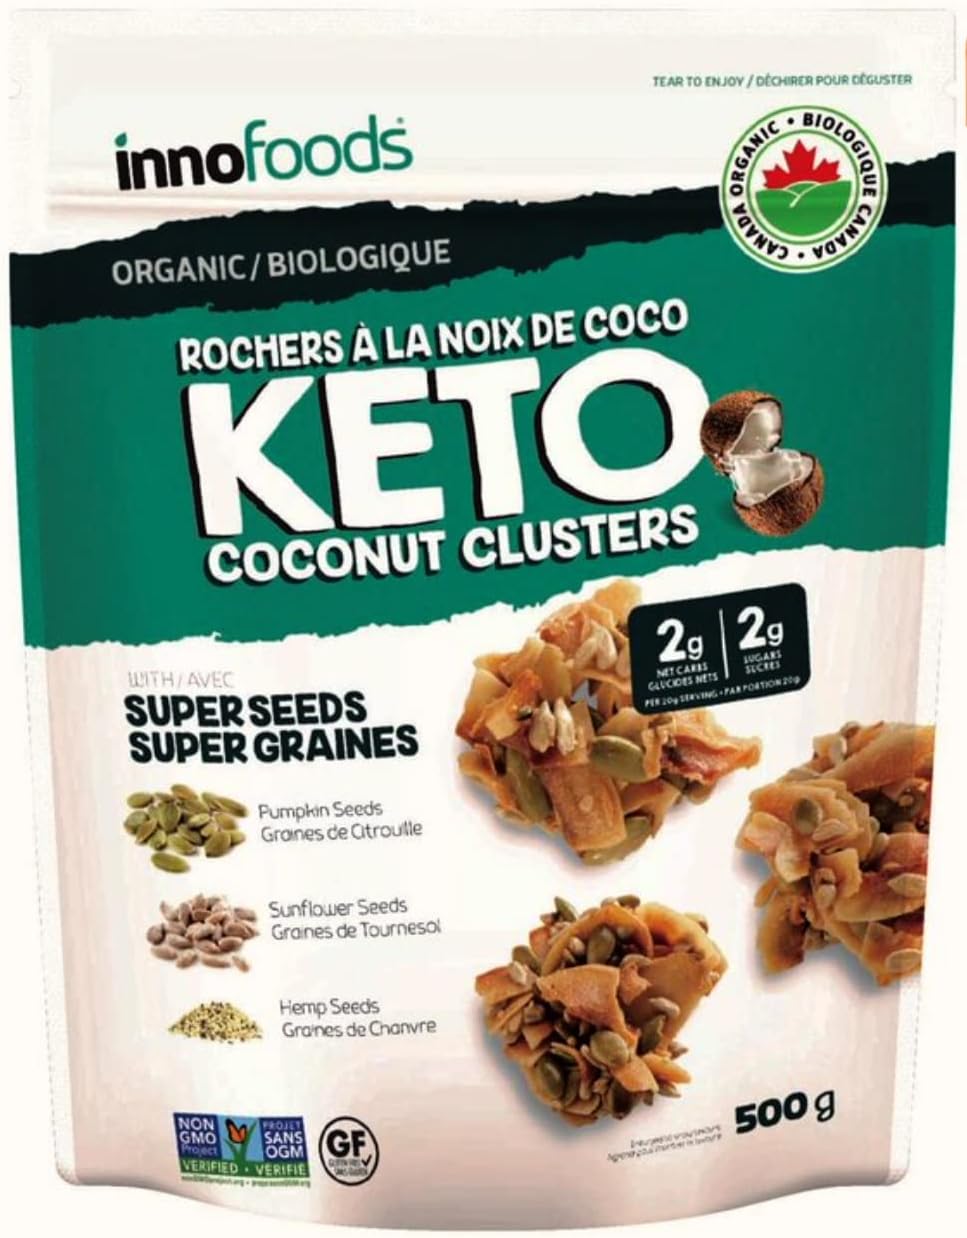 Innofoods Organic Coconut Keto Clusters with Super Seeds - 500g